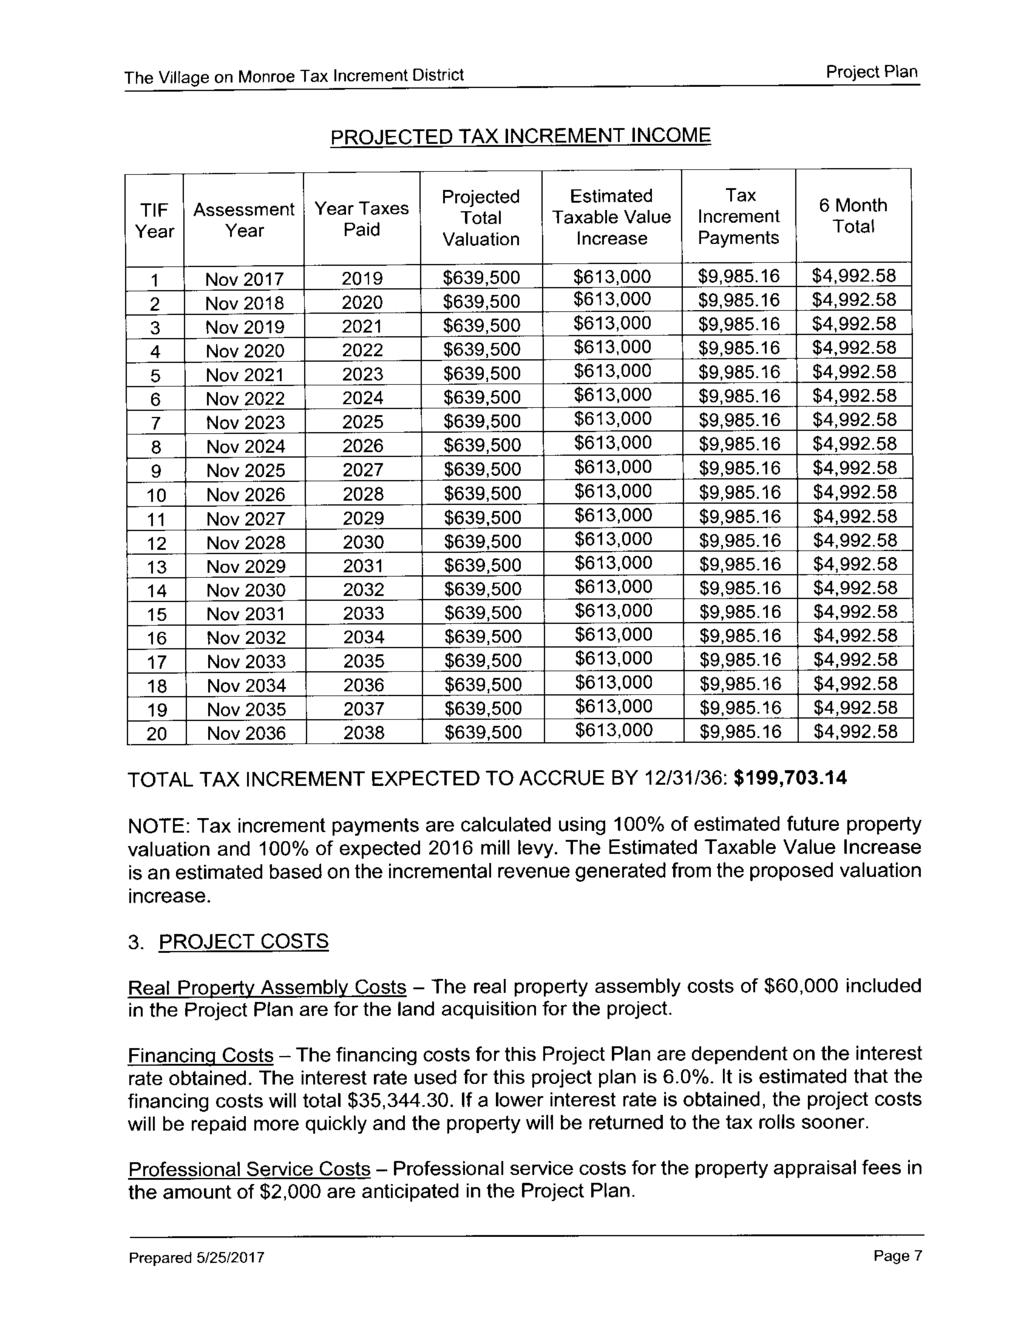 PROJECTED TAX INCREMENT INCOME TIF Year Assessment Year Year Taxes Paid Projected Total Valuation Estimated Taxable Value Increase Tax Increment Payments 6 Month Total 1 Nov 2017 2019 $639,500